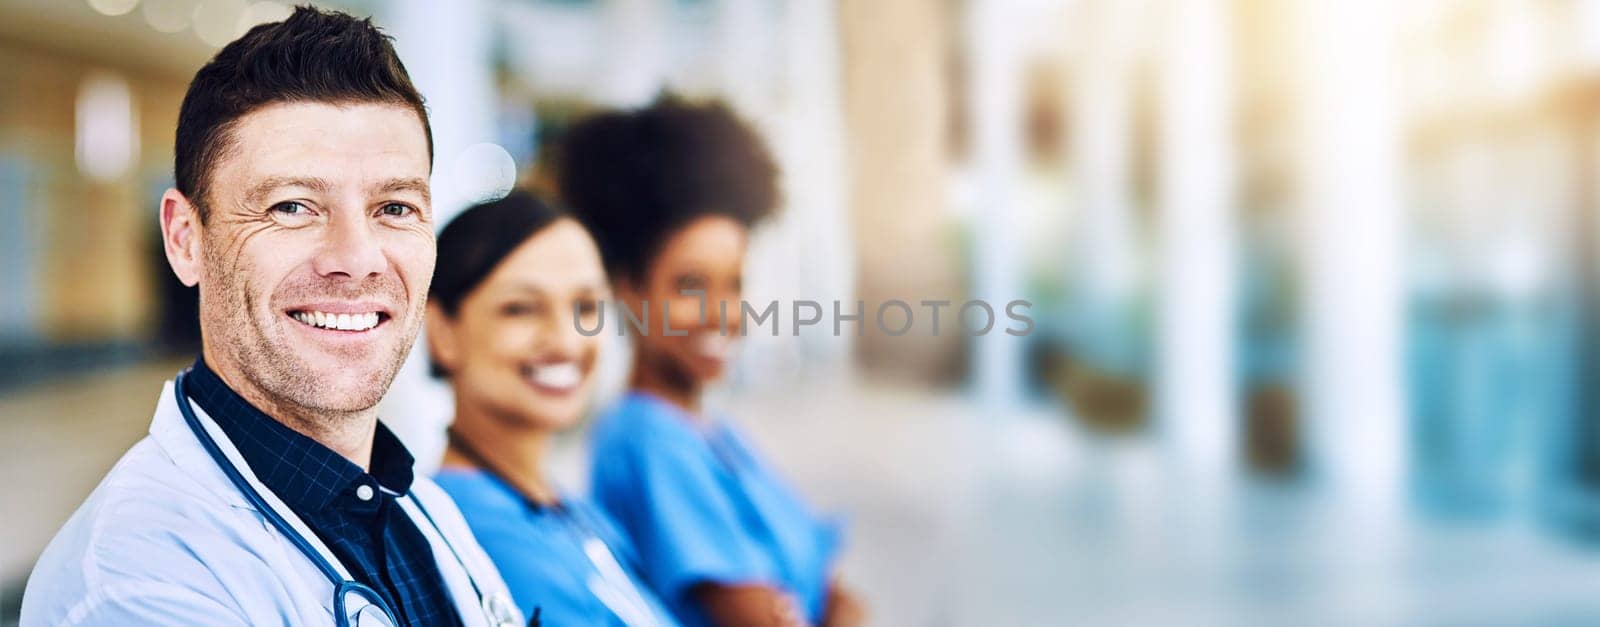 Healthcare, portrait of doctor and nurse team, confident to help with leadership and motivation in hospital or clinic. Diversity, teamwork and man with women medical workers standing together blurred.